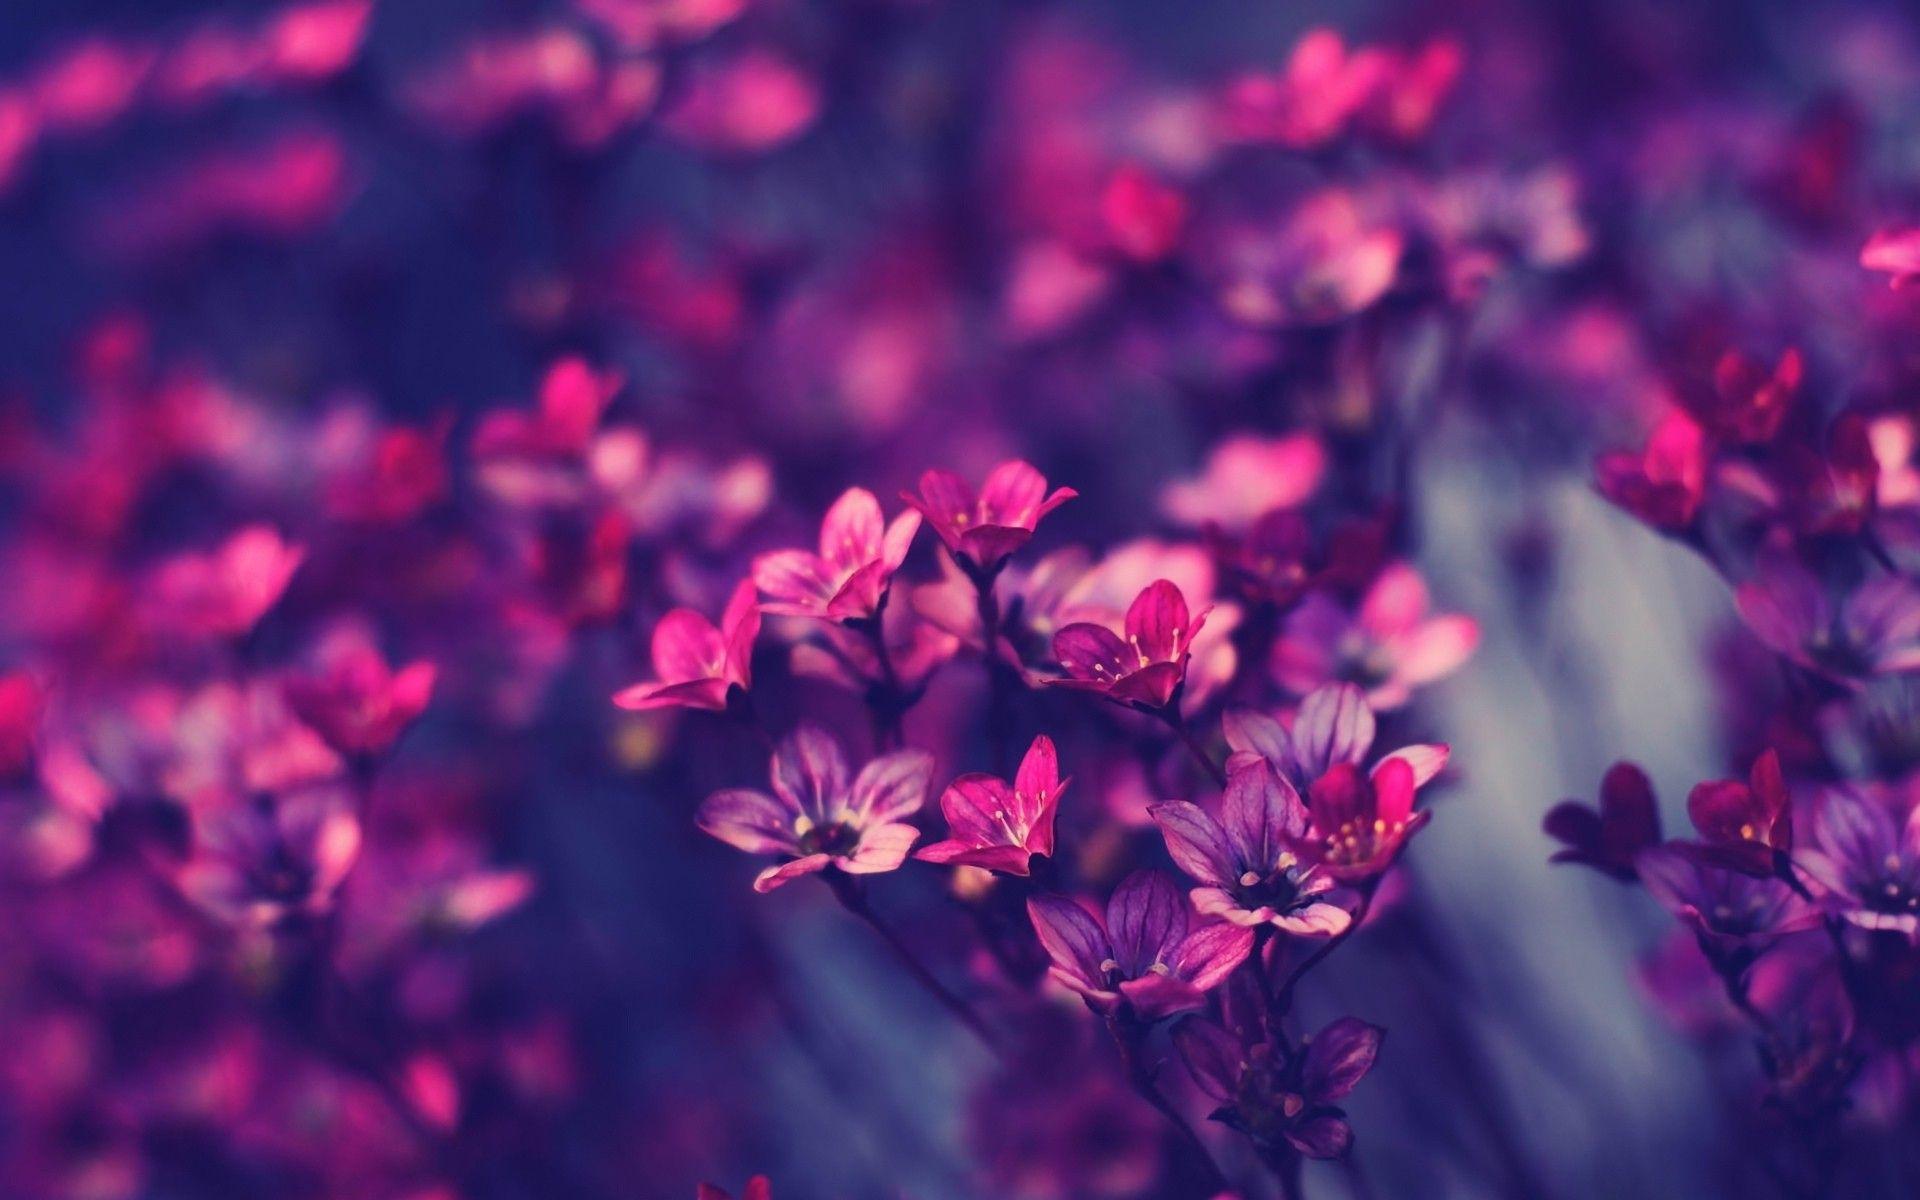 Floral backgrounds Tumblr ·① Download free HD backgrounds for